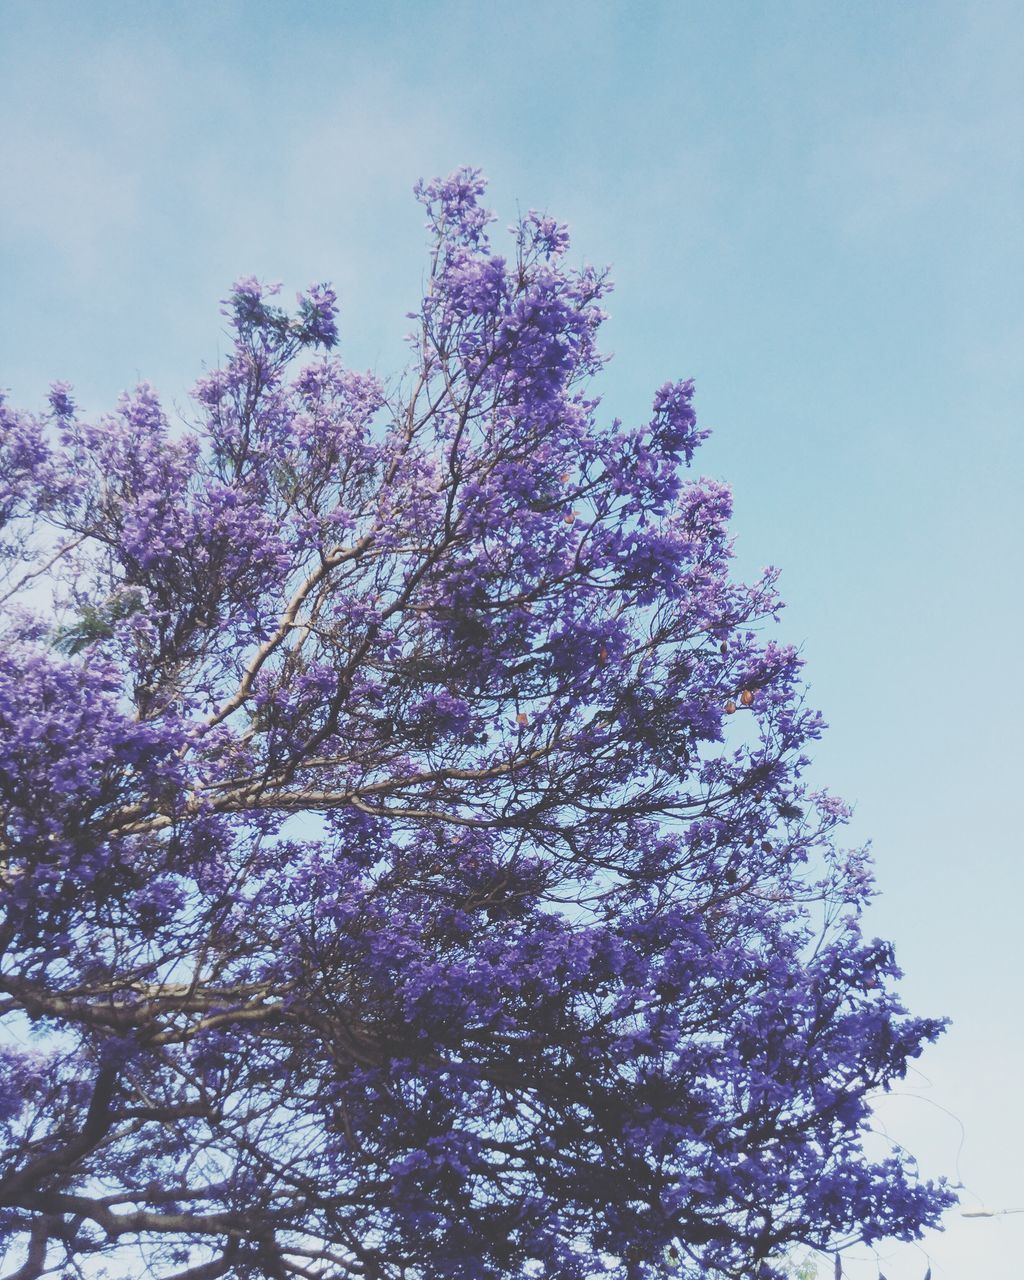 growth, low angle view, tree, nature, flower, sky, beauty in nature, no people, freshness, fragility, springtime, purple, outdoors, branch, day, close-up